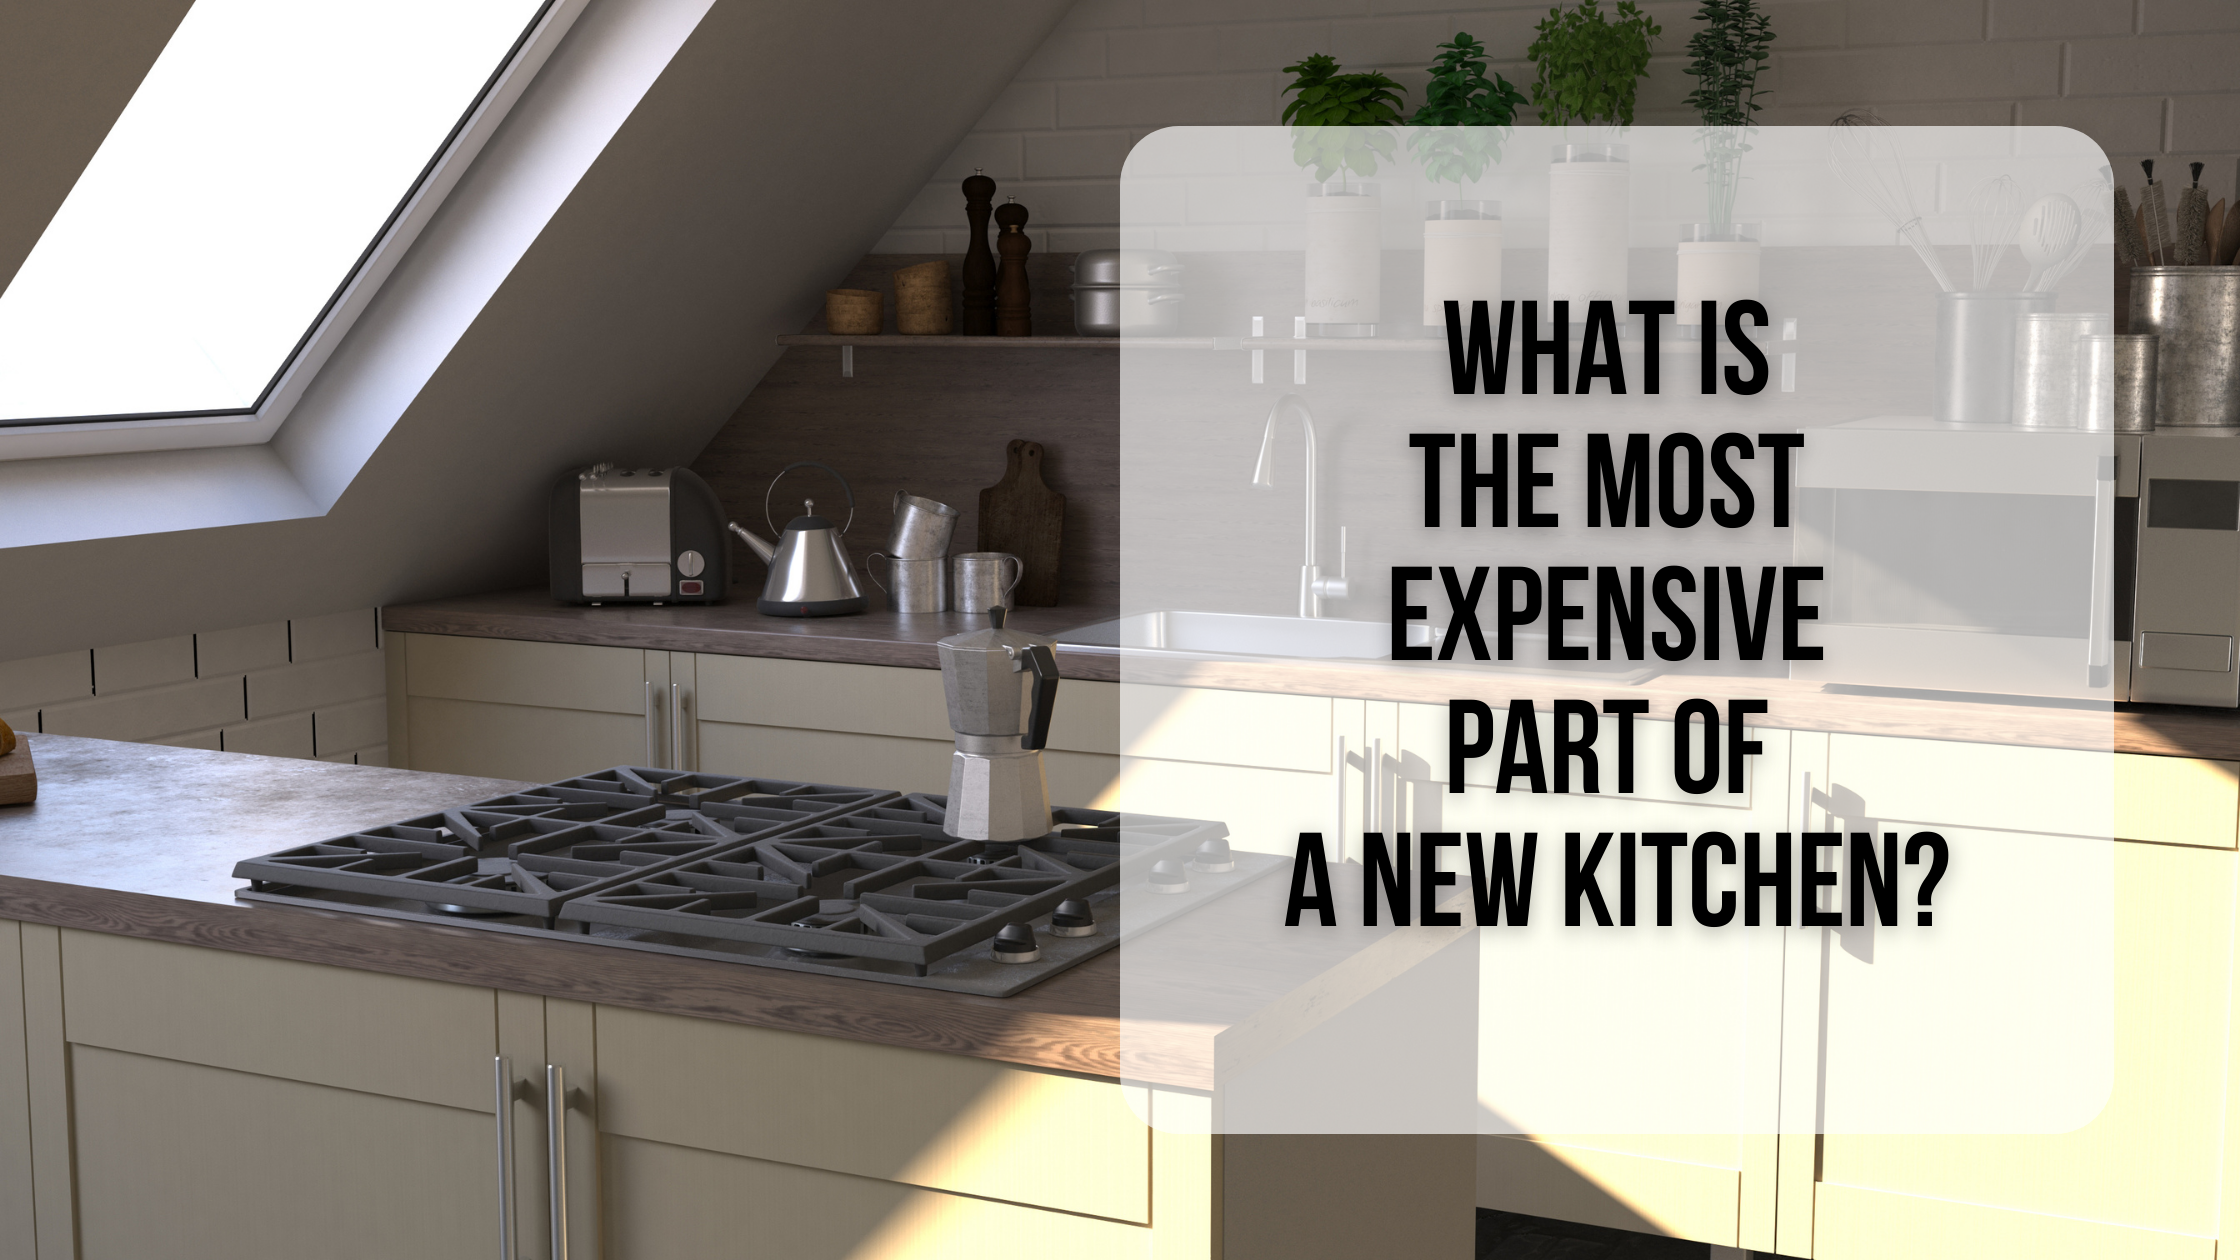 What is the most expensive part of a new kitchen